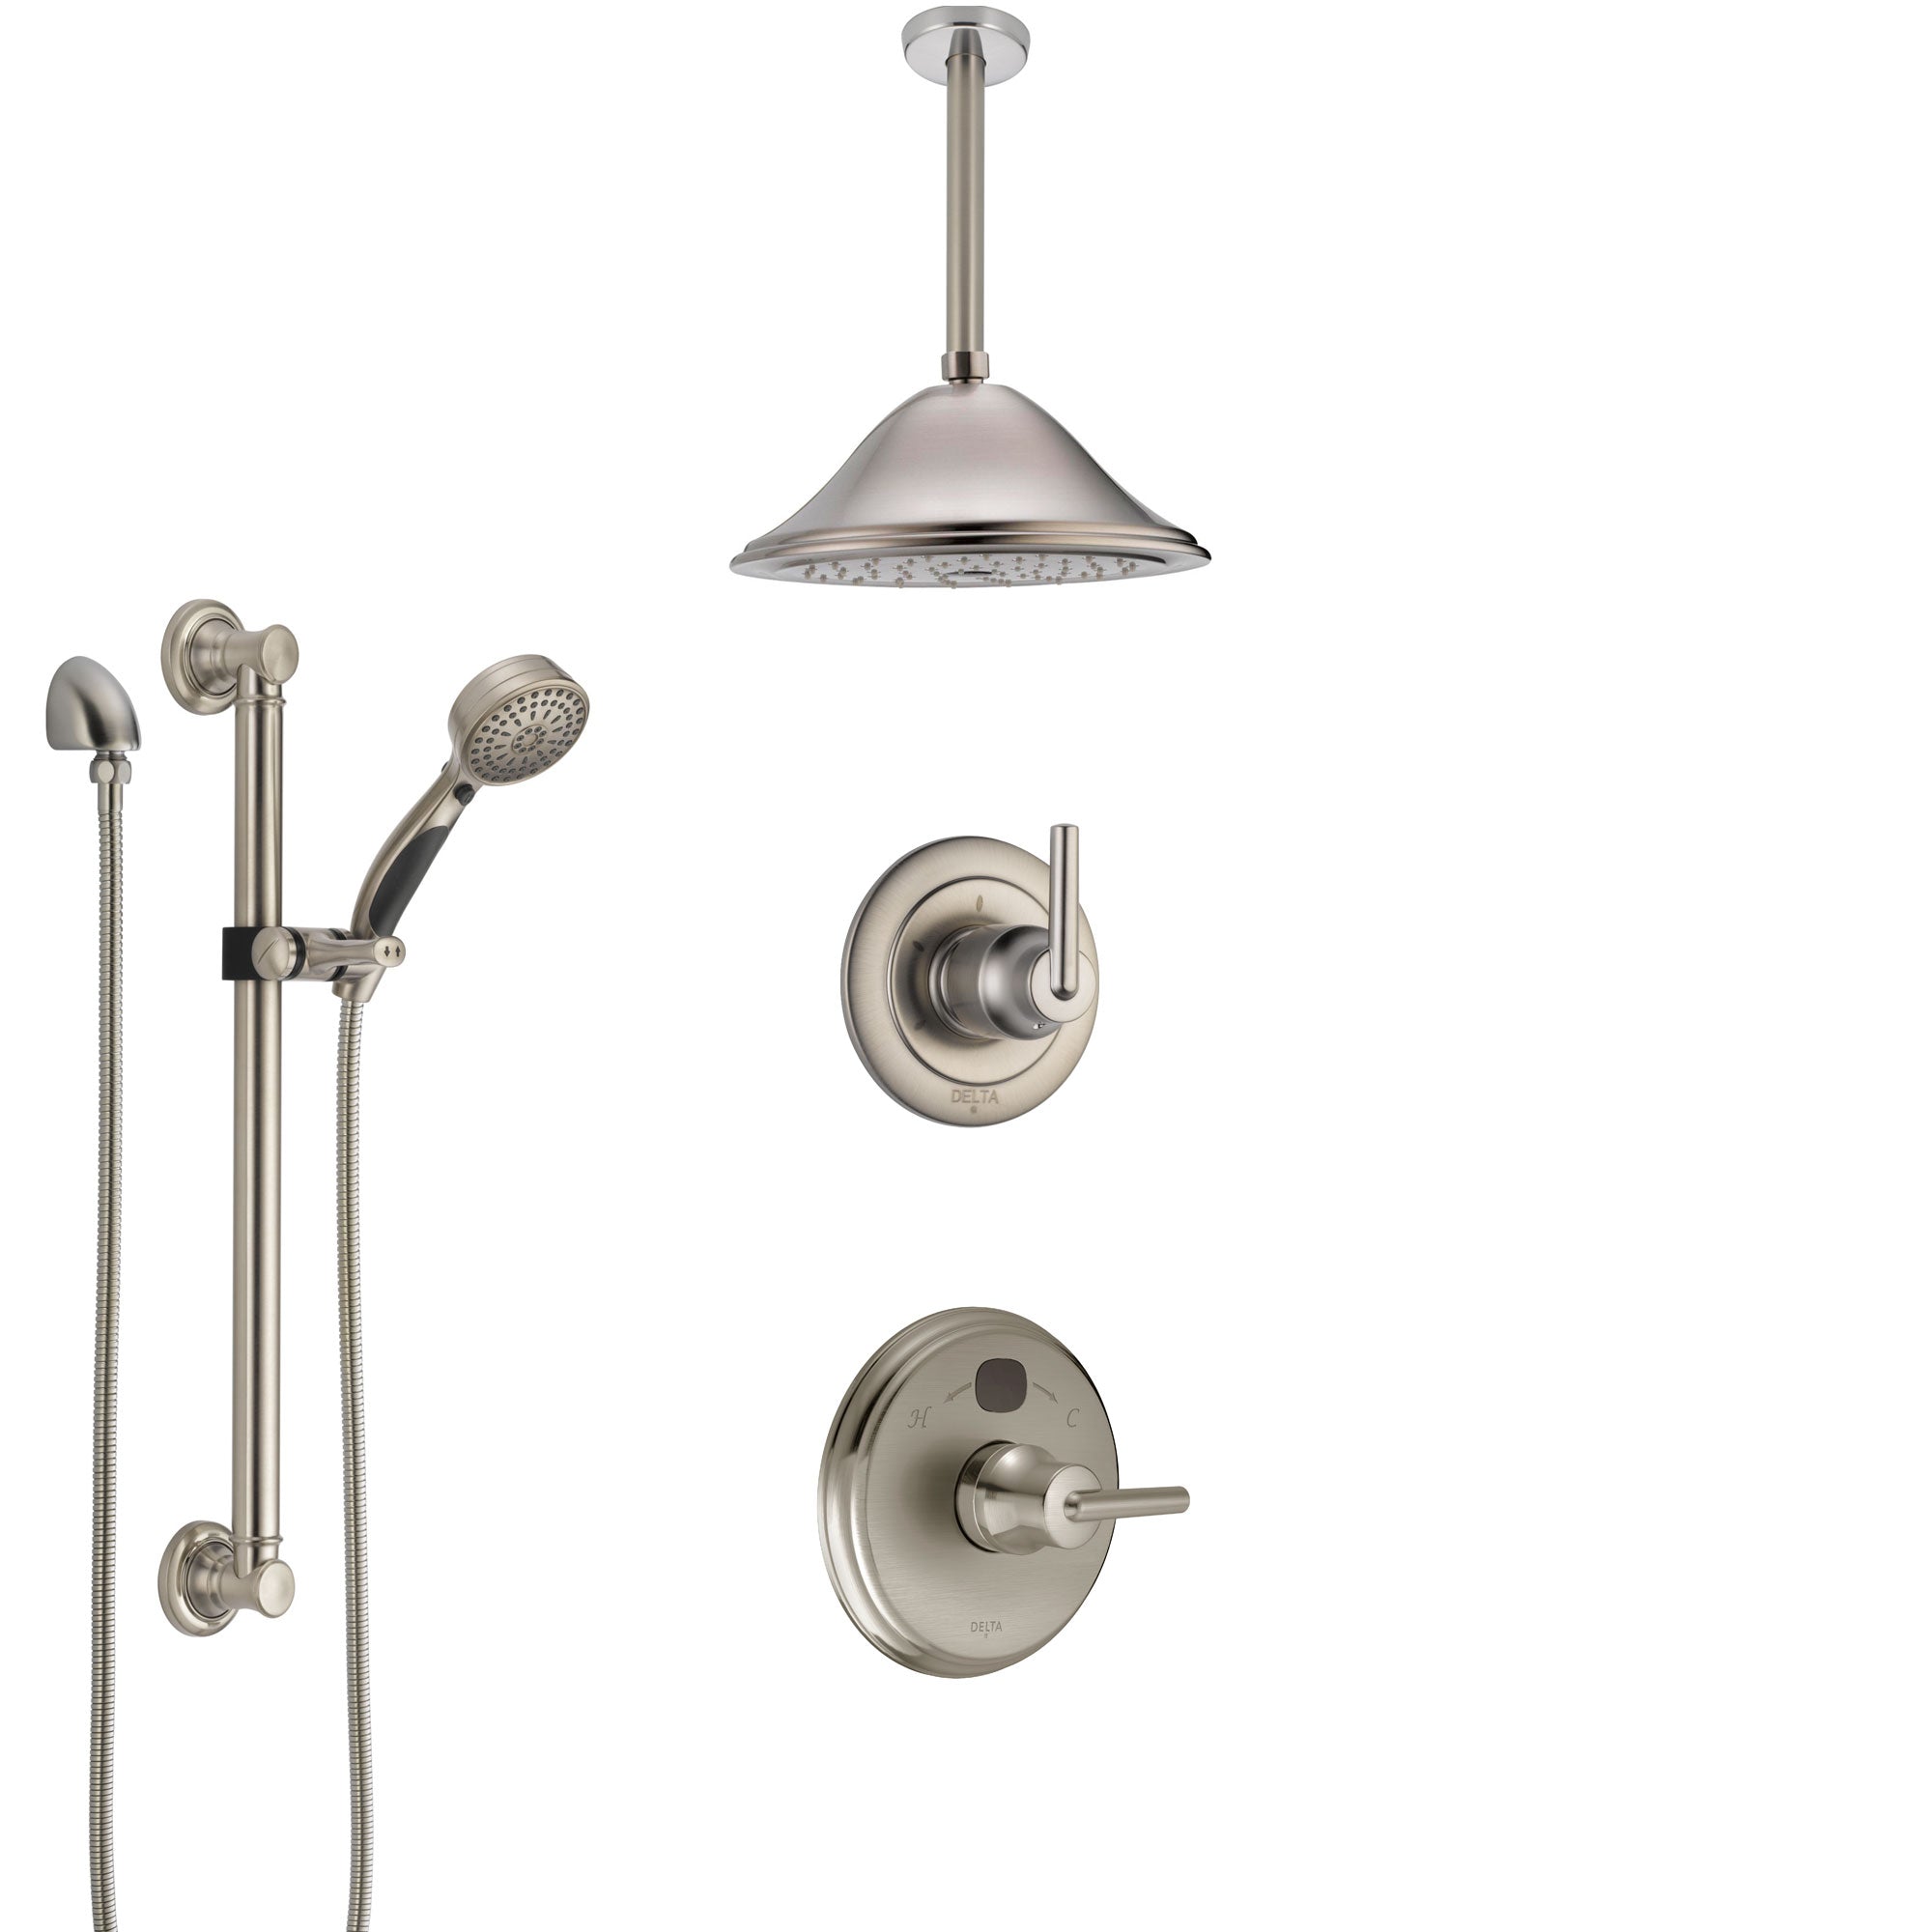 Delta Trinsic Stainless Steel Finish Shower System with Temp2O Control, Diverter, Ceiling Mount Showerhead, and Hand Shower with Grab Bar SS14002SS10